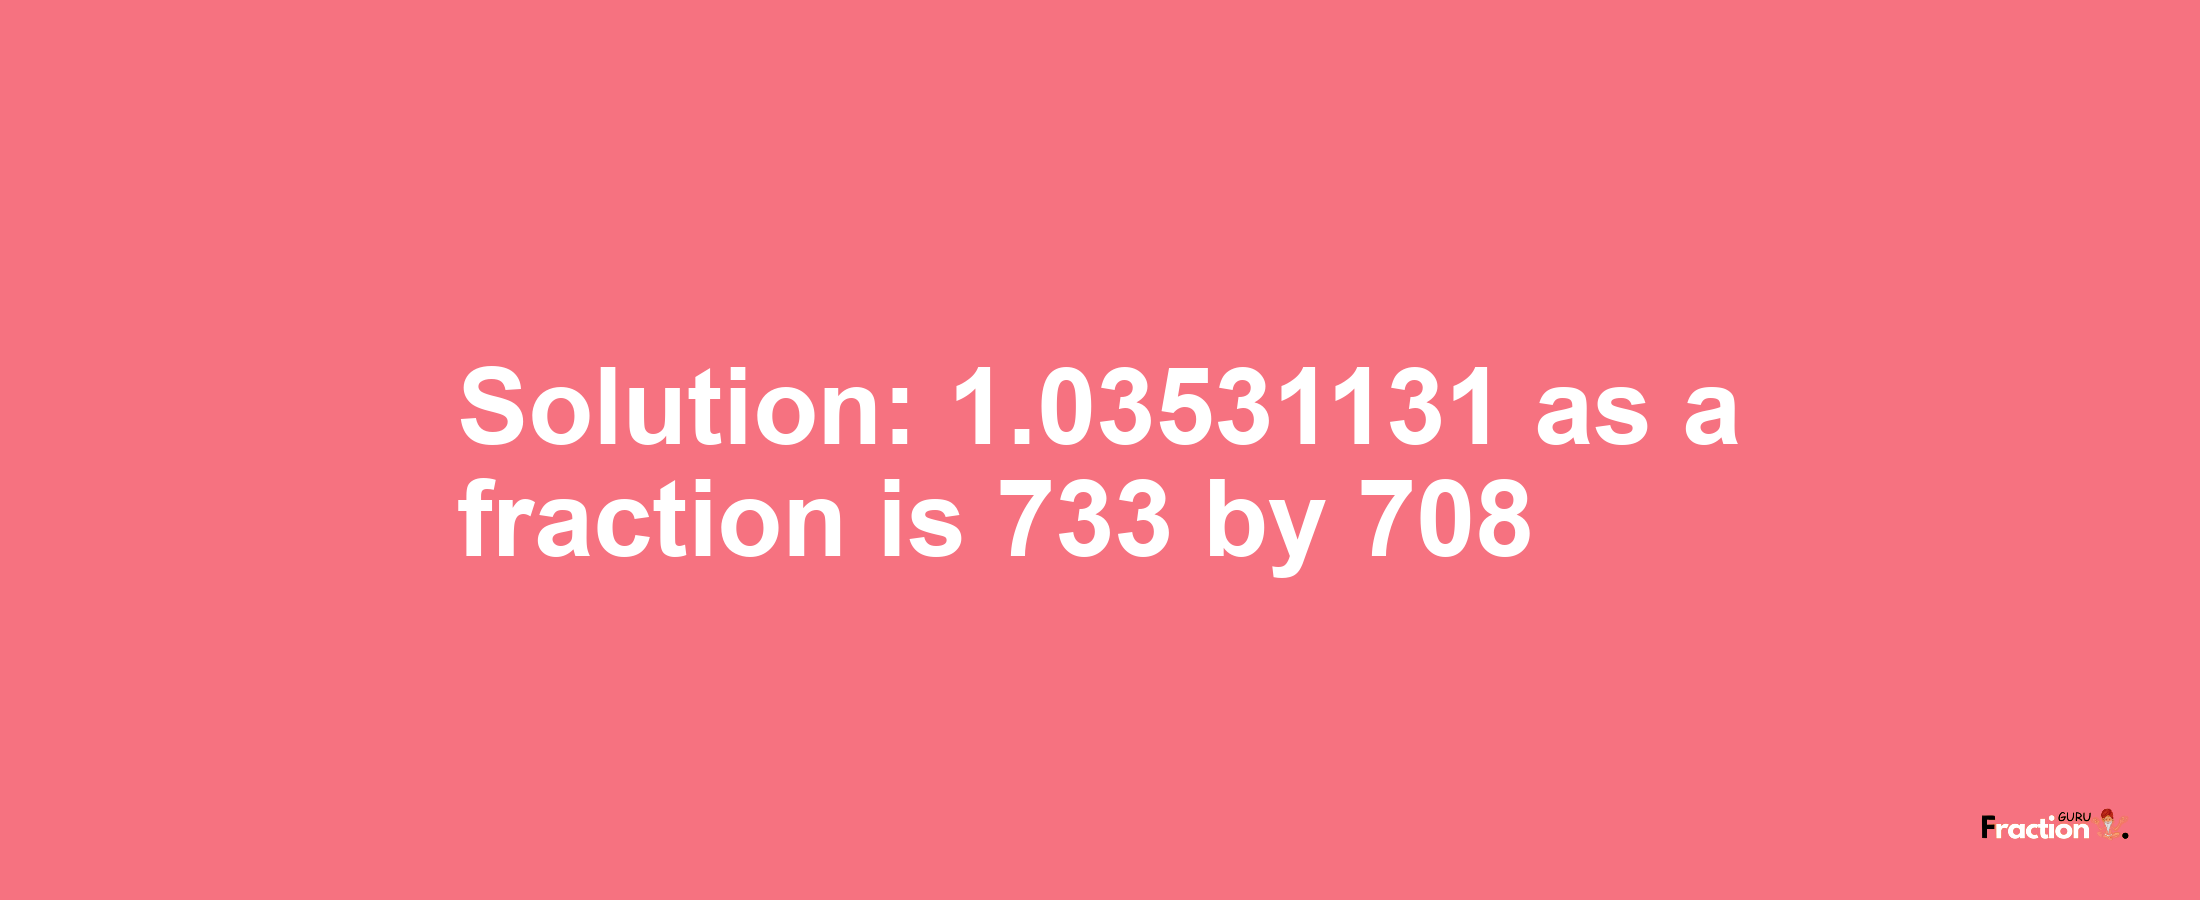 Solution:1.03531131 as a fraction is 733/708